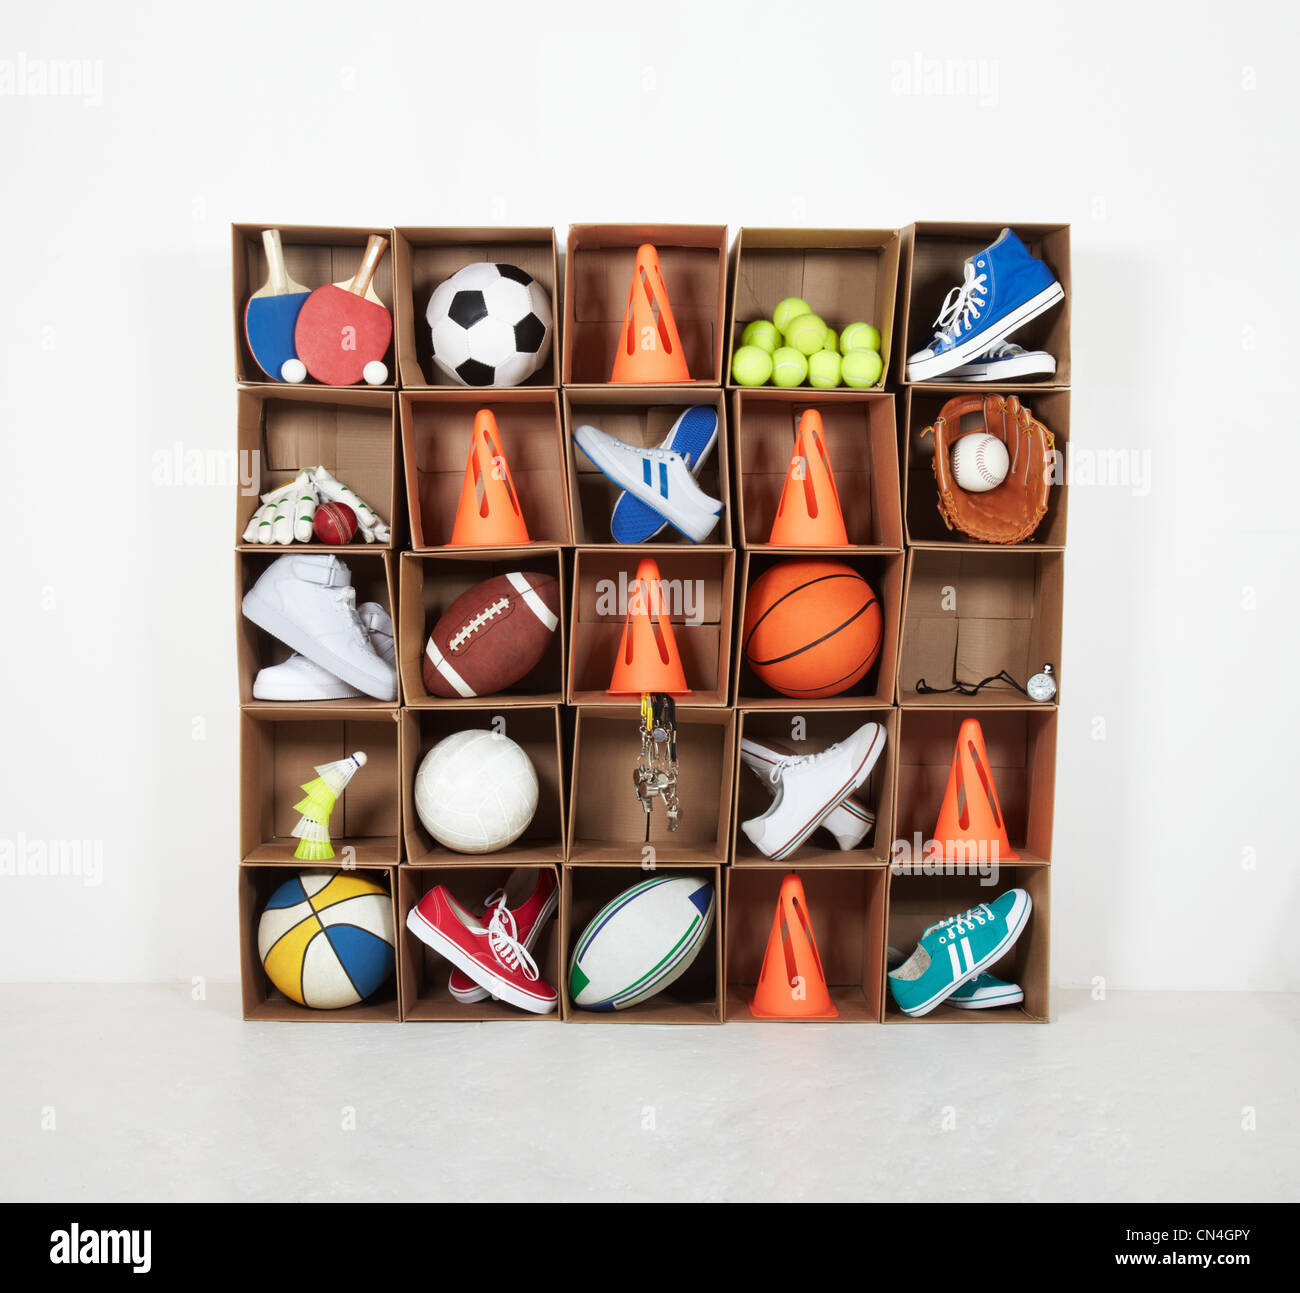 Cardboard box lockers filled with sports equipment Stock Photo